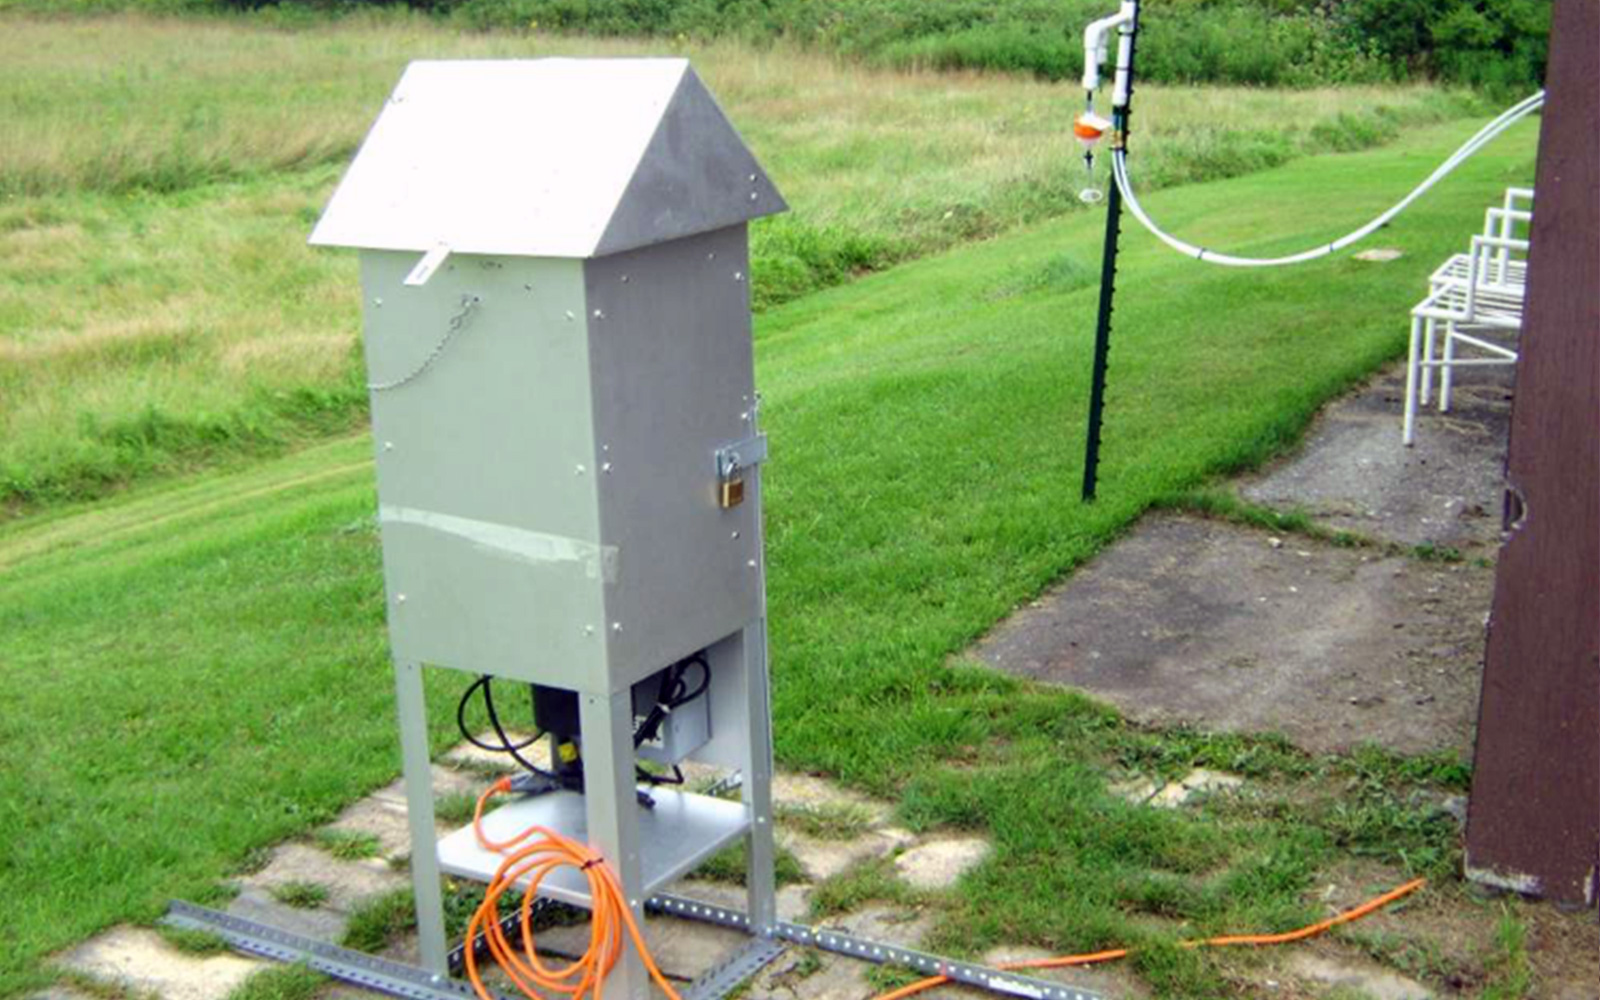 Air monitoring device situated in a yard just outside a home 